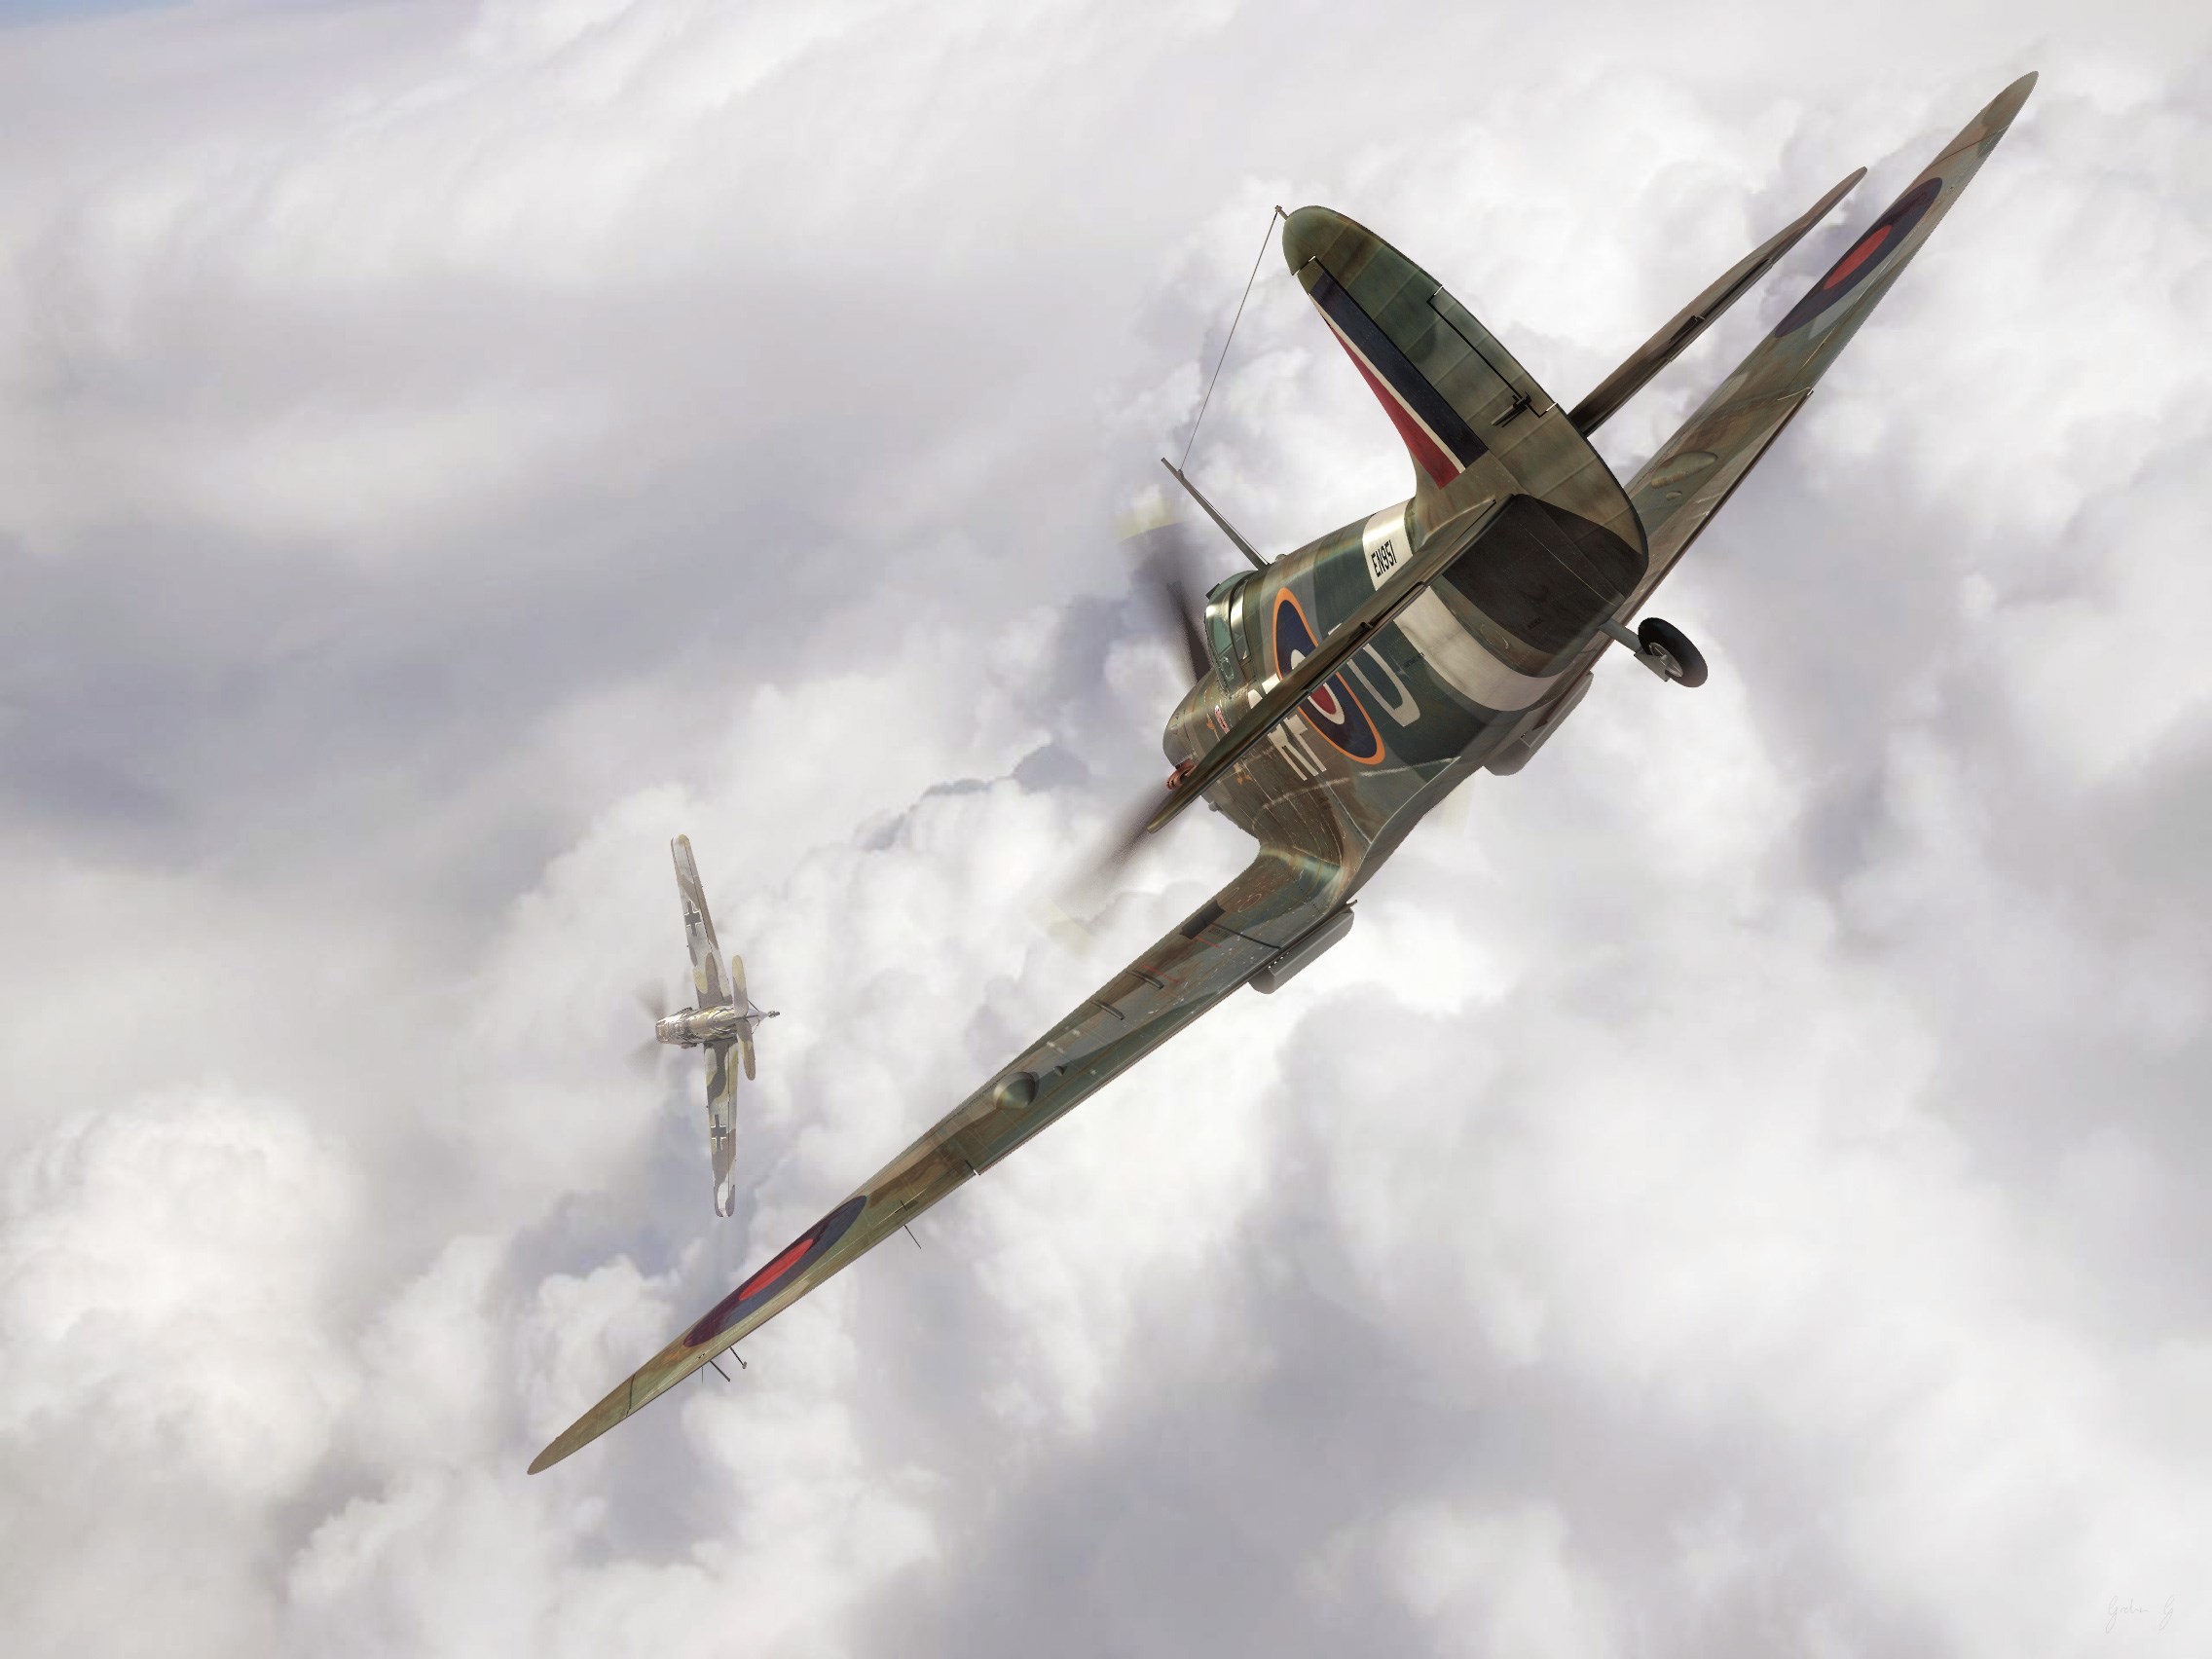 2272x1704 Widescreen Wallpapers: supermarine spitfire picture,  (285 kB)